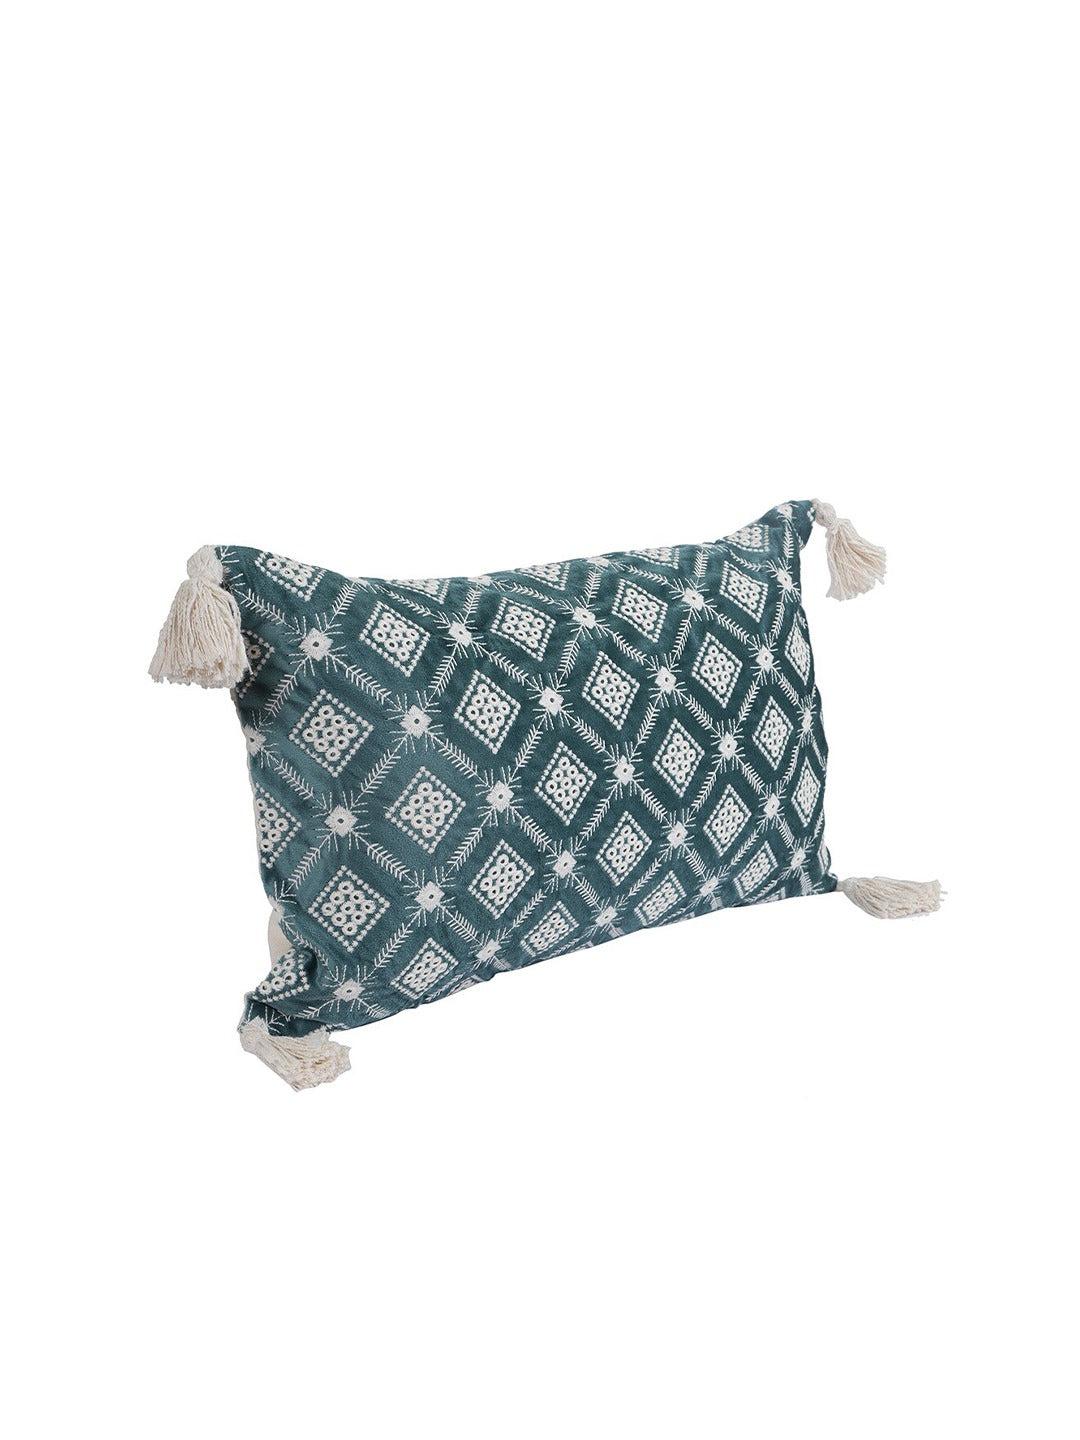 Set of 2 Teal & White Embroidered Velvet Rectangle Cushion Covers